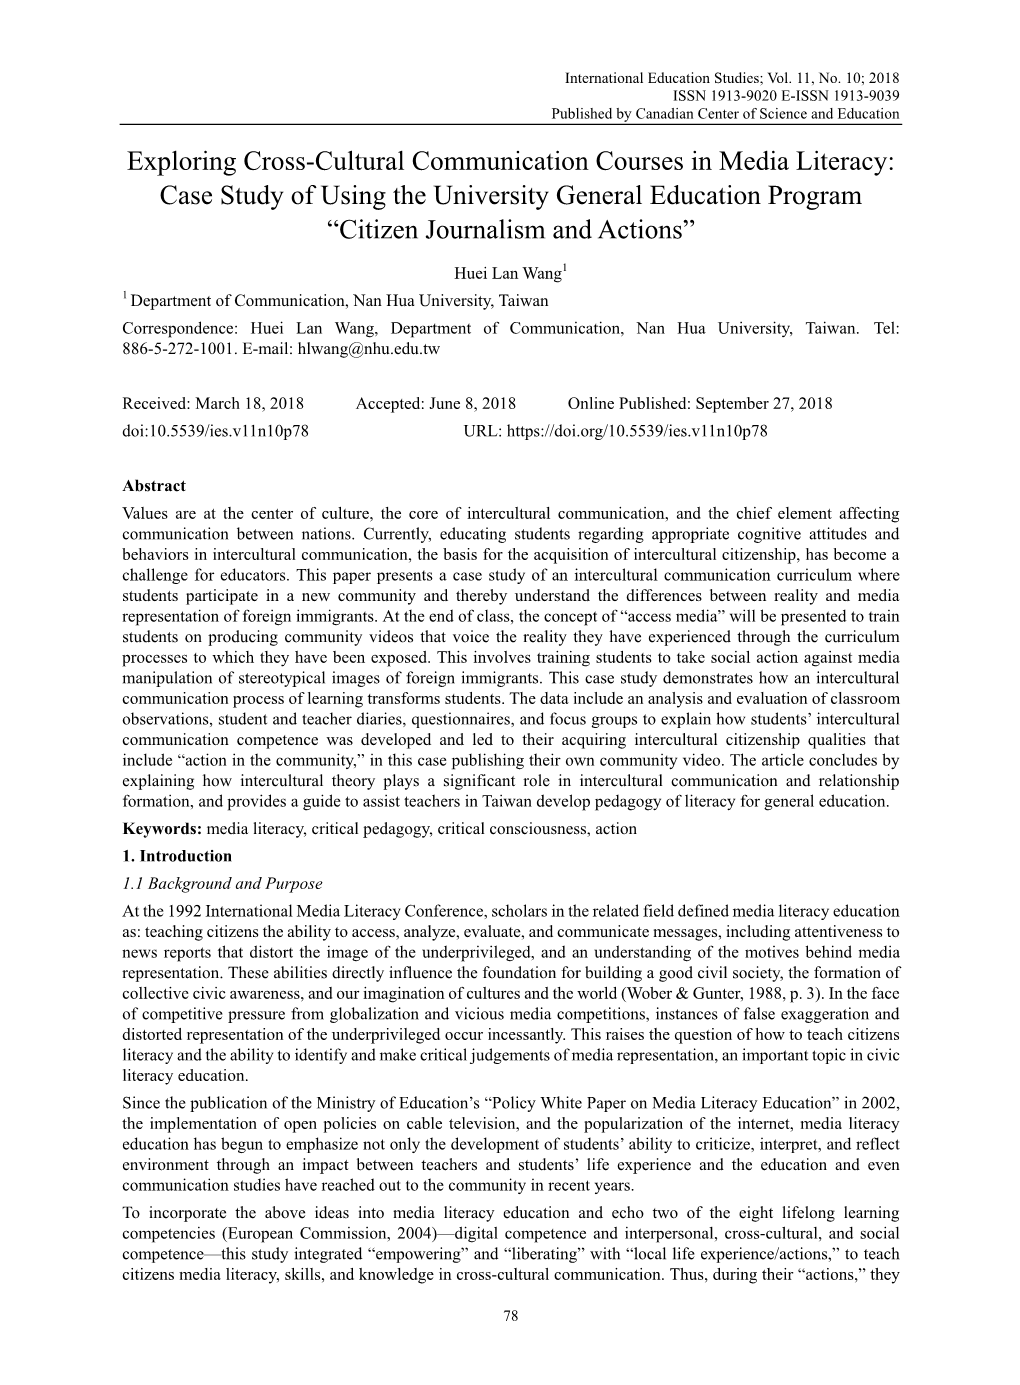 Exploring Cross-Cultural Communication Courses in Media Literacy: Case Study of Using the University General Education Program “Citizen Journalism and Actions”